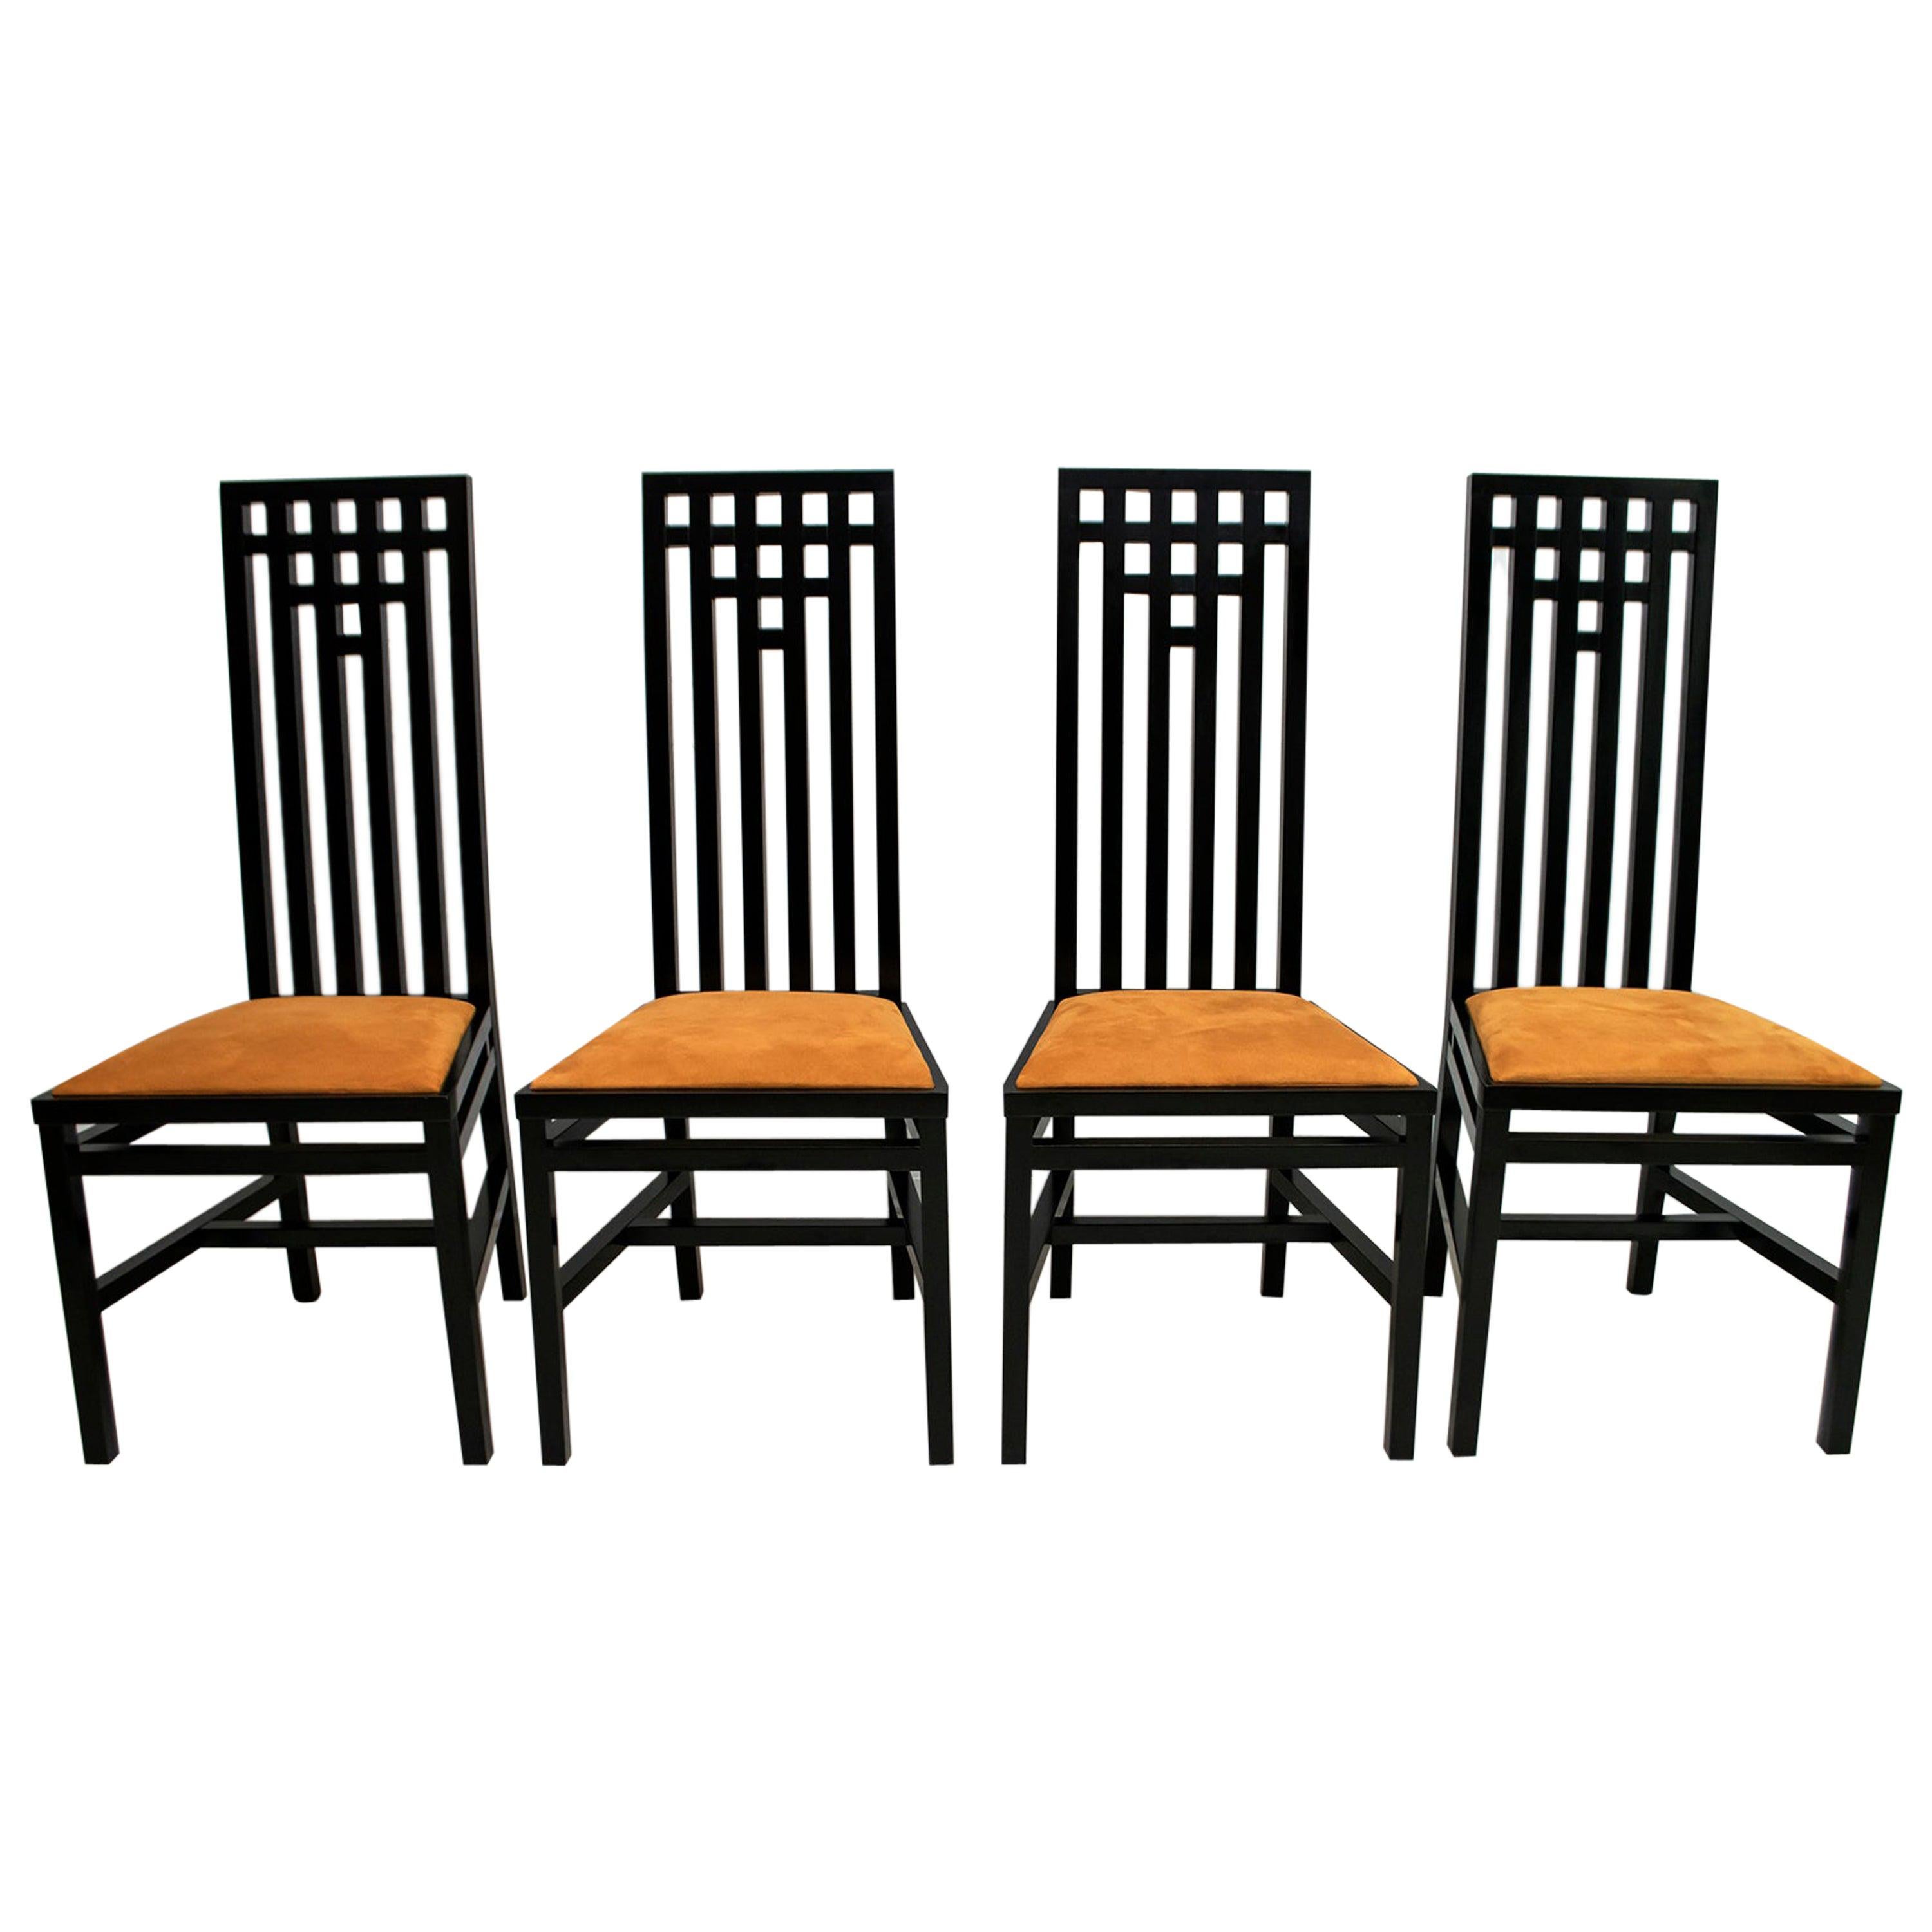 Four Mackintosh Style Black Lacquered High Back Chairs, 1979